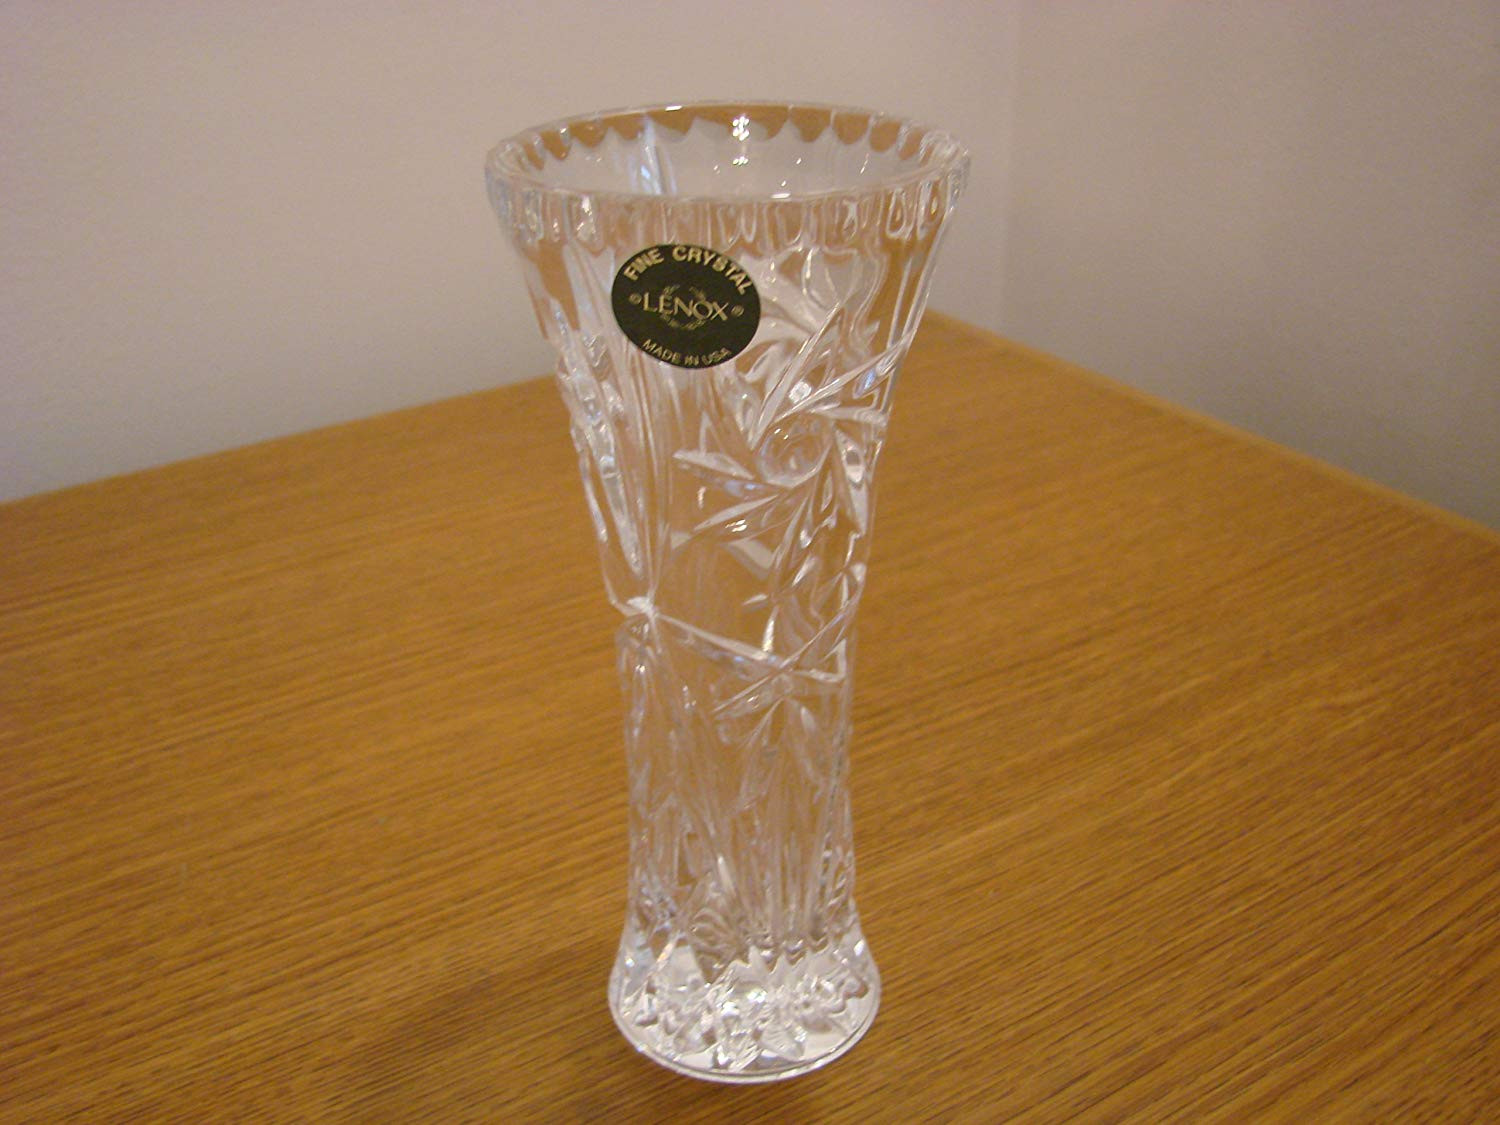 lenox vase patterns of amazon com lenox crystal star vase from lenox collections 6 inches pertaining to amazon com lenox crystal star vase from lenox collections 6 inches home kitchen